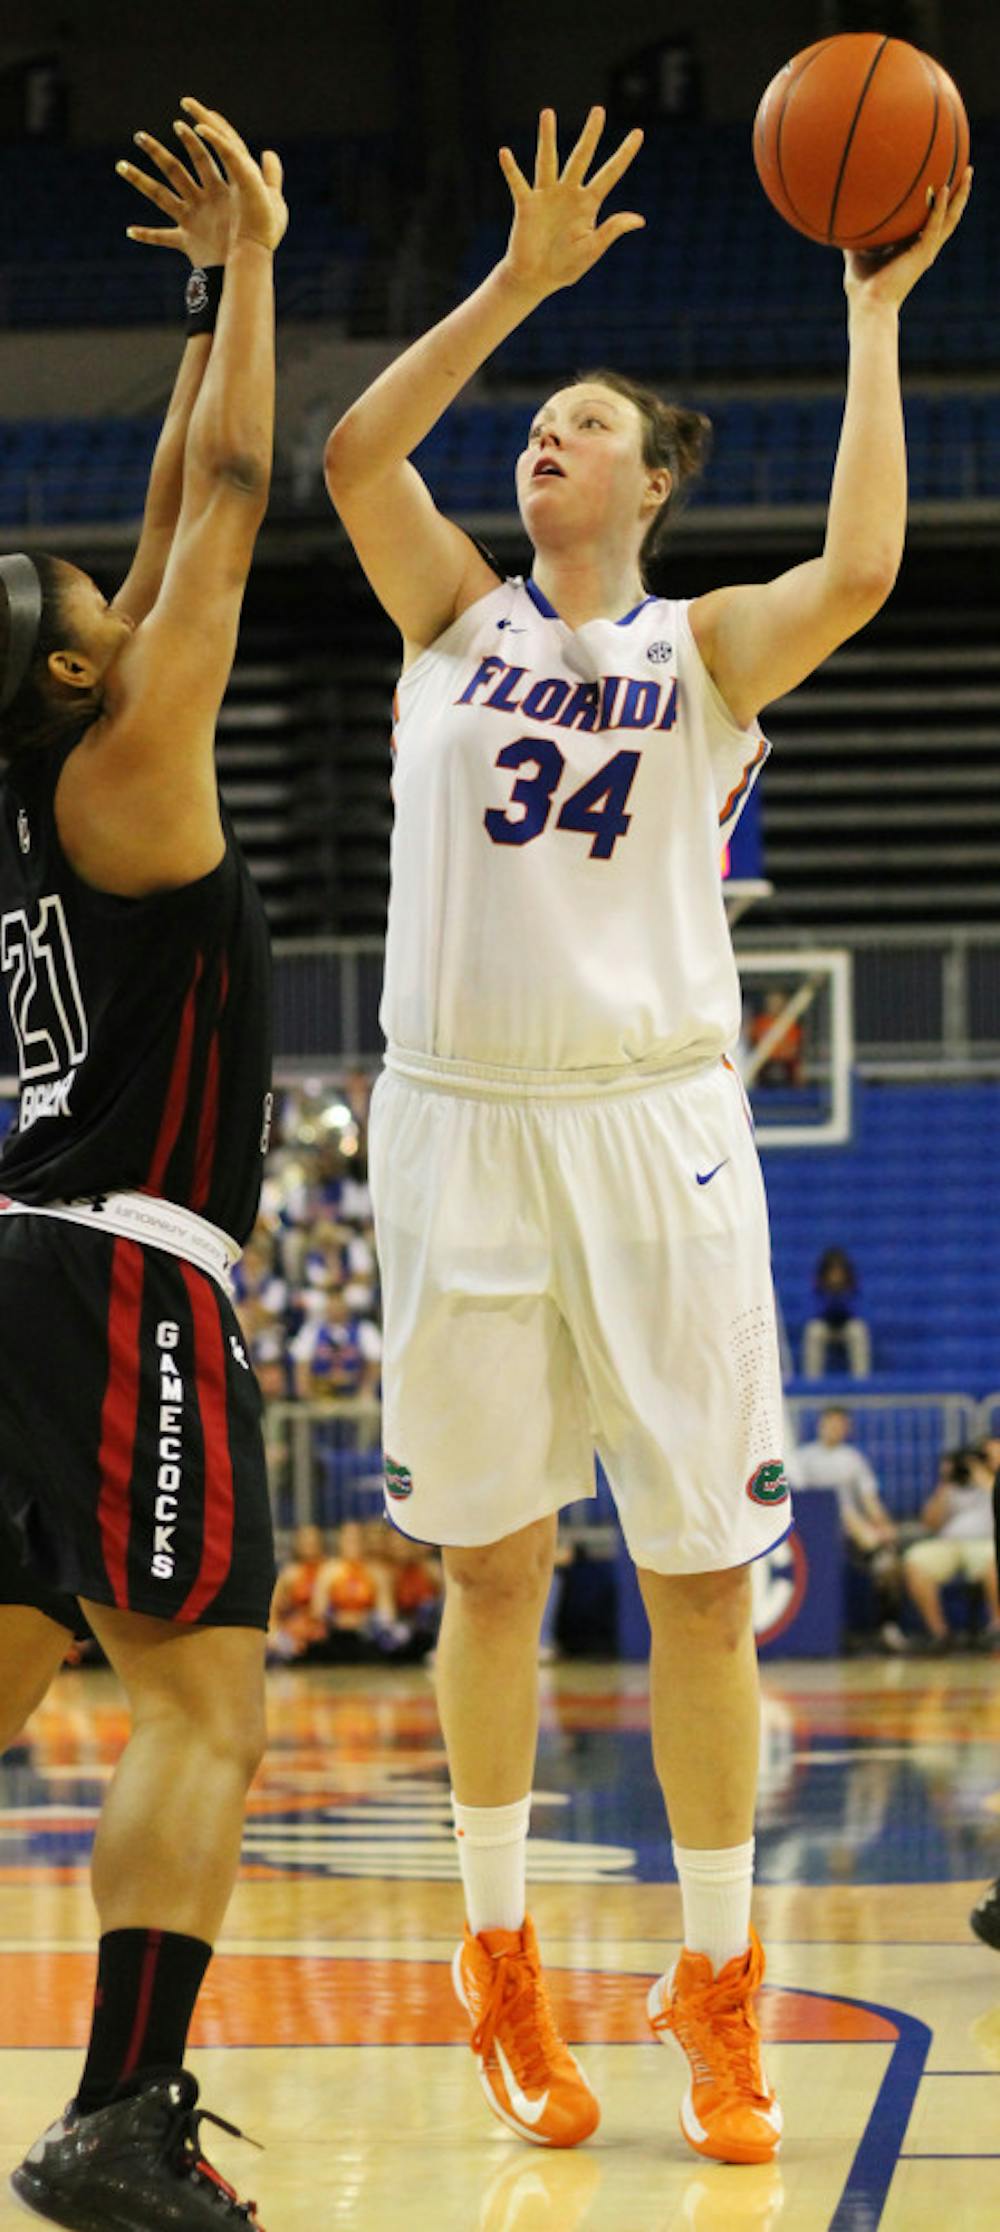 <p>Florida center Vicky McIntyre (34) attempts a shot over a South Carolina defender in the O'Connell Center during Florida's 52-44 loss to South Carolina. After one season with the Gators, McIntyre will not return to UF next season. </p>